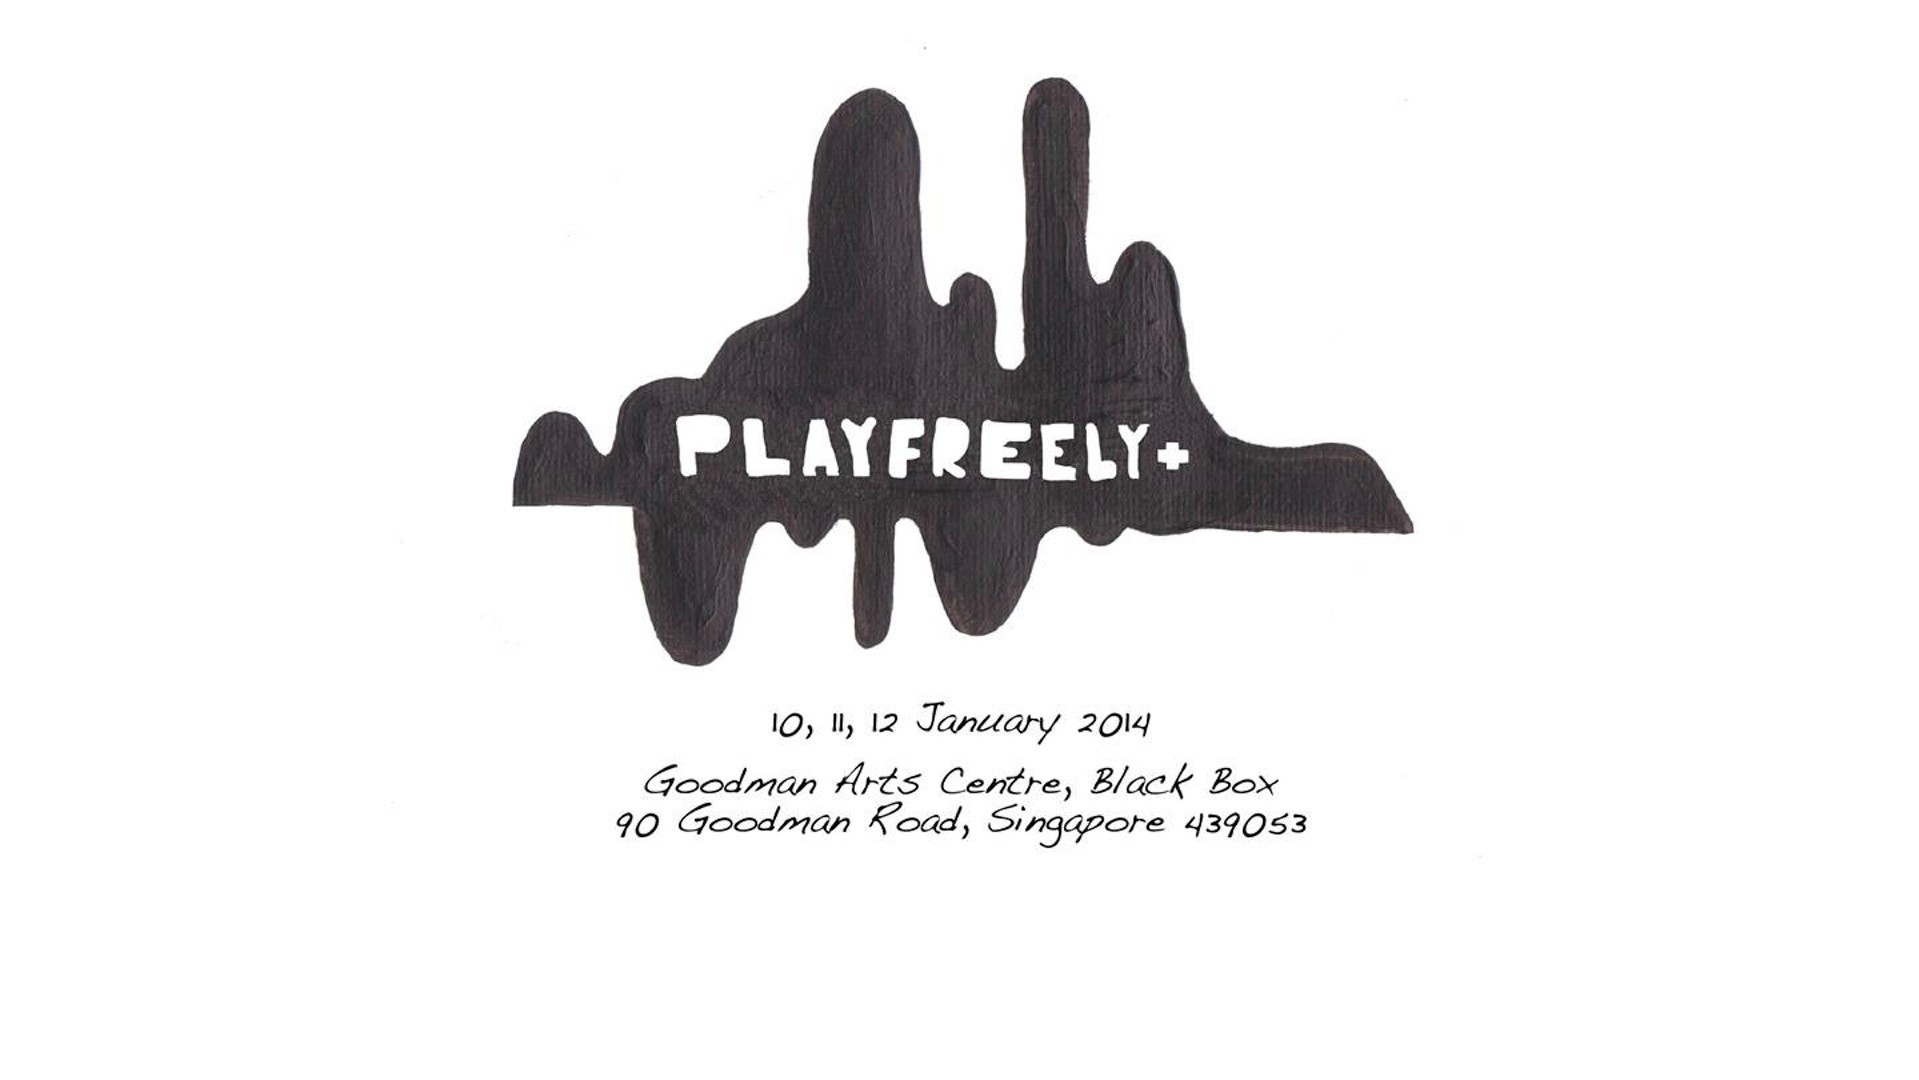 Playfreely+ 2014 (Day 2)